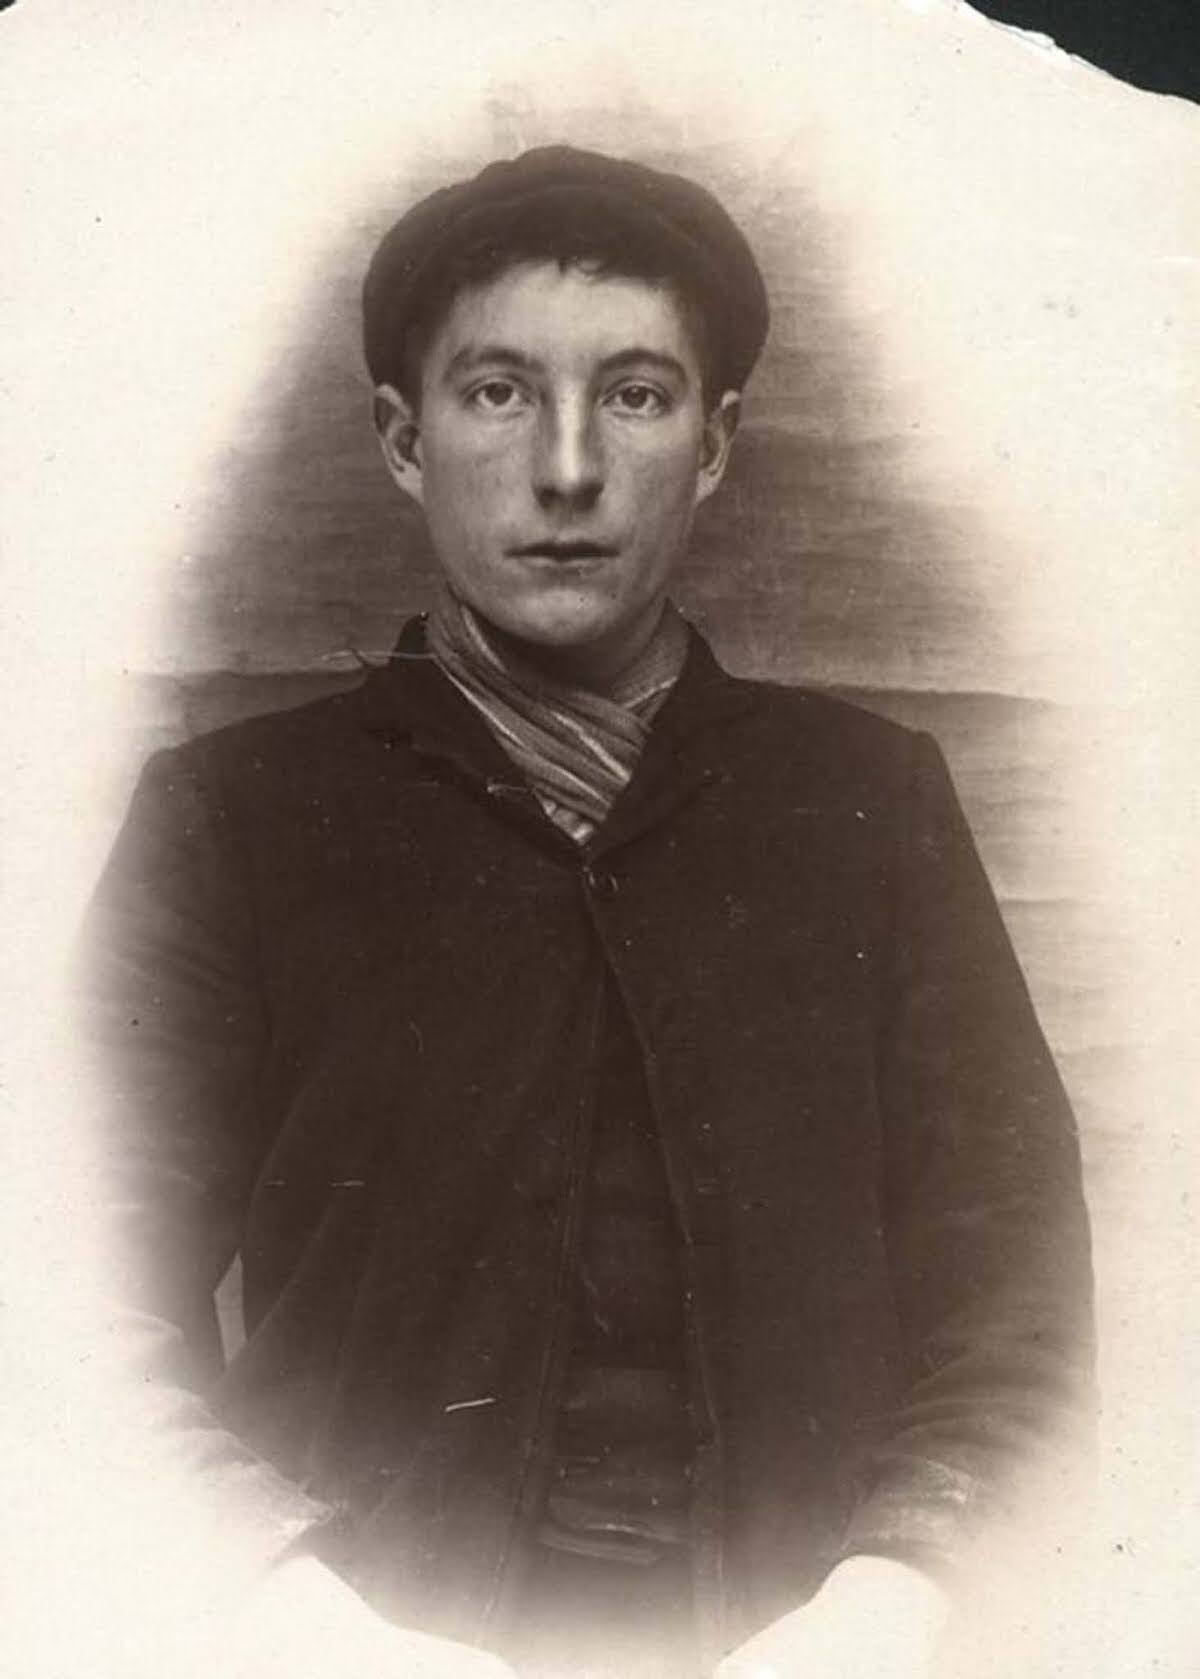 Francis Smith, 20, arrested for stealing a copper vessel, 1908.